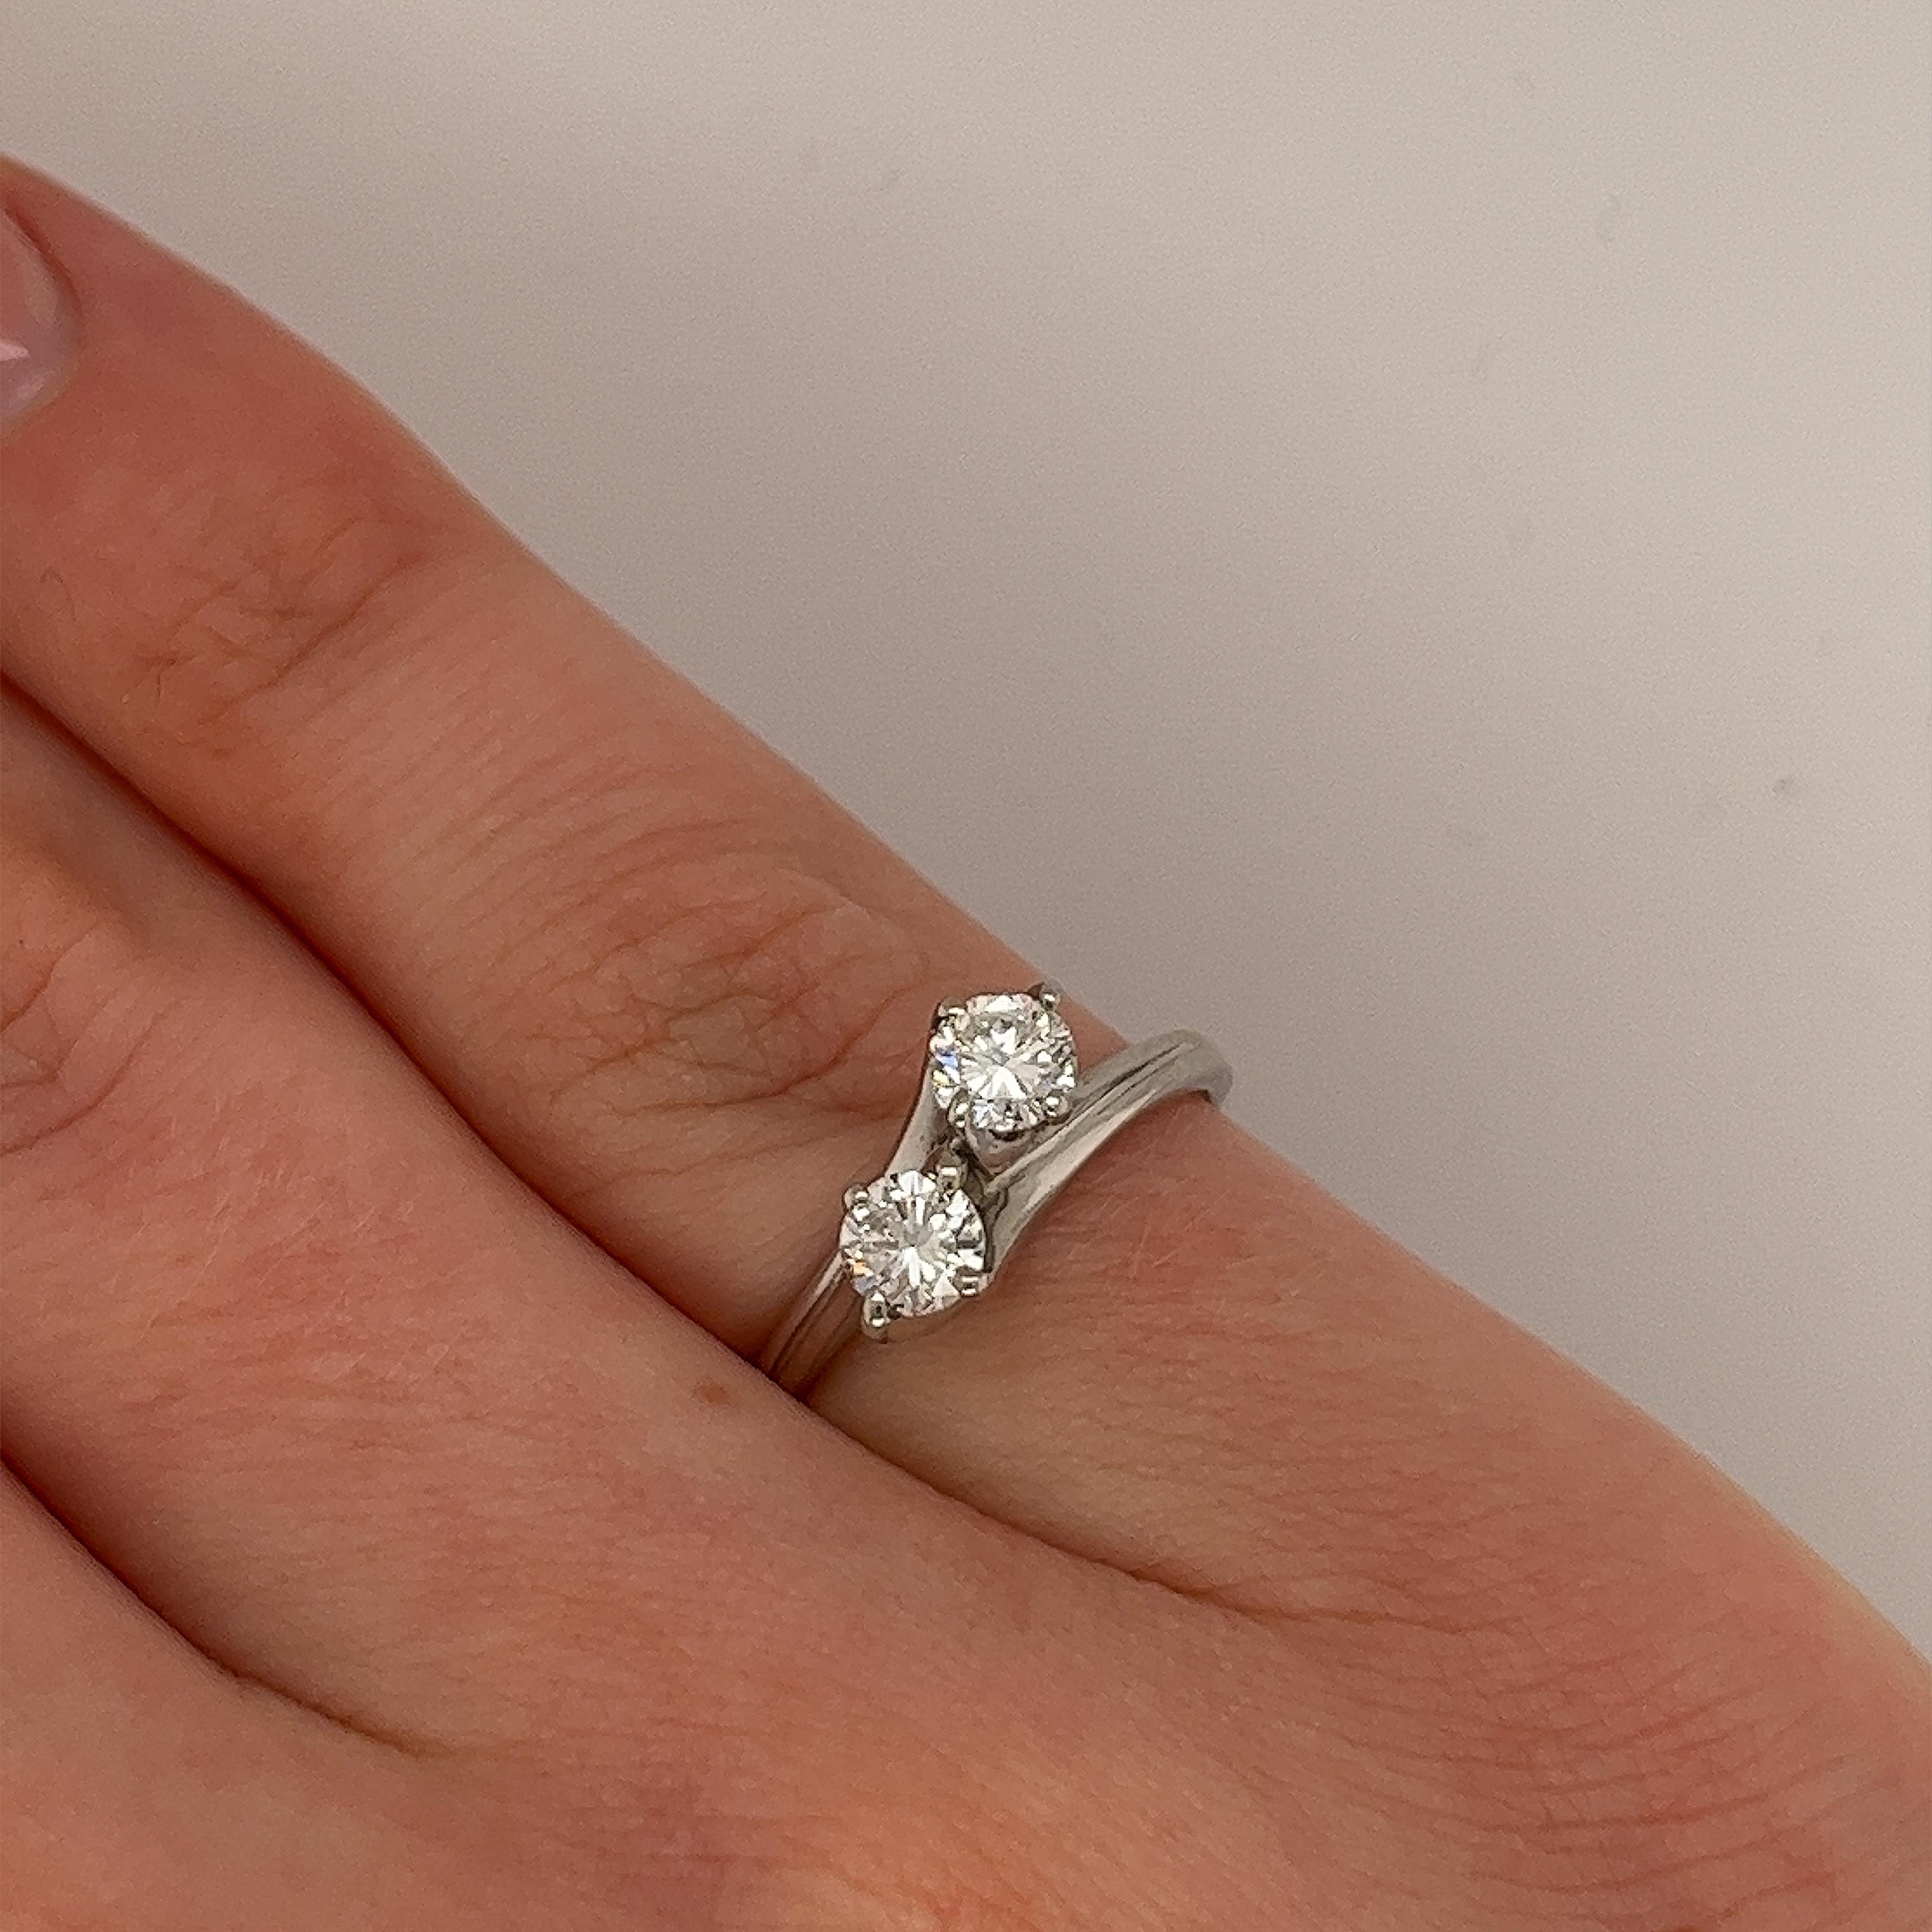  18ct White Gold Diamond Crossover Ring, Set with 2 Round Diamonds 0.50ct In Excellent Condition For Sale In London, GB